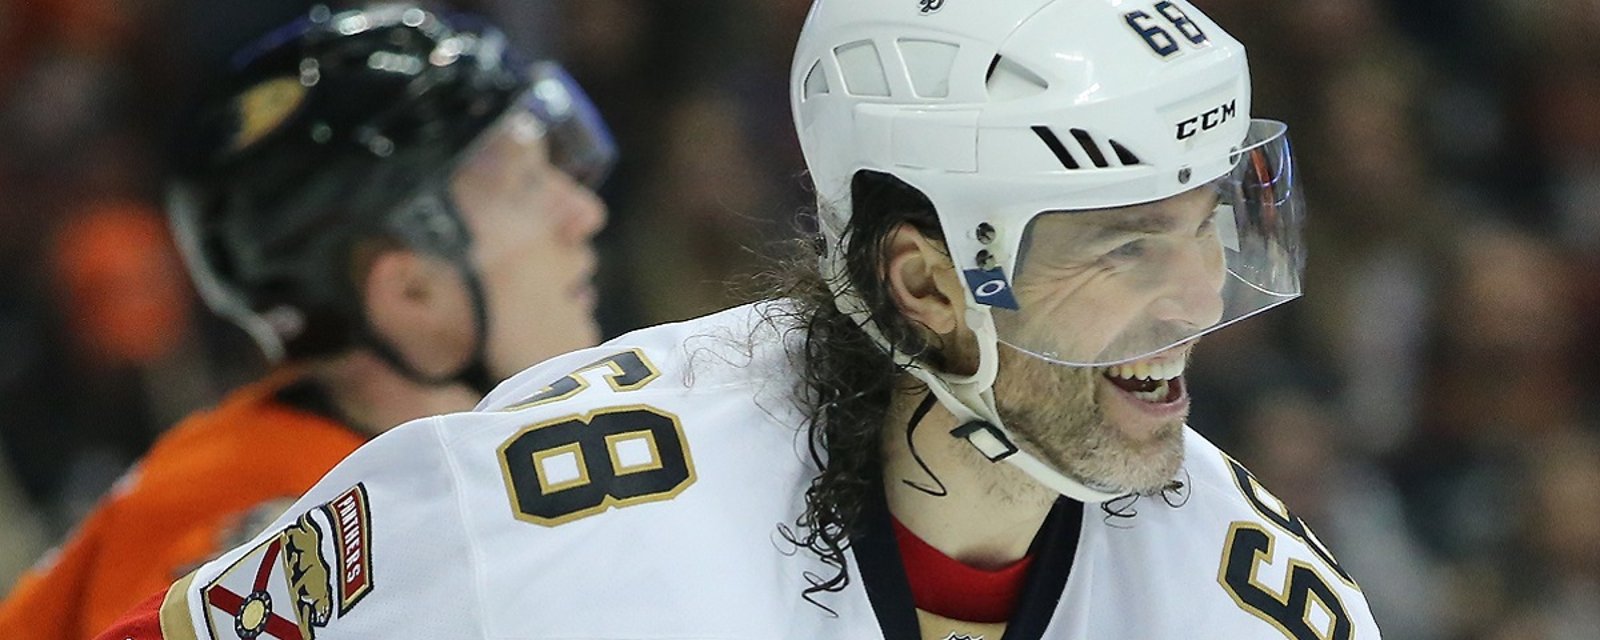 Major update on Jagr's ongoing contract negotiations.